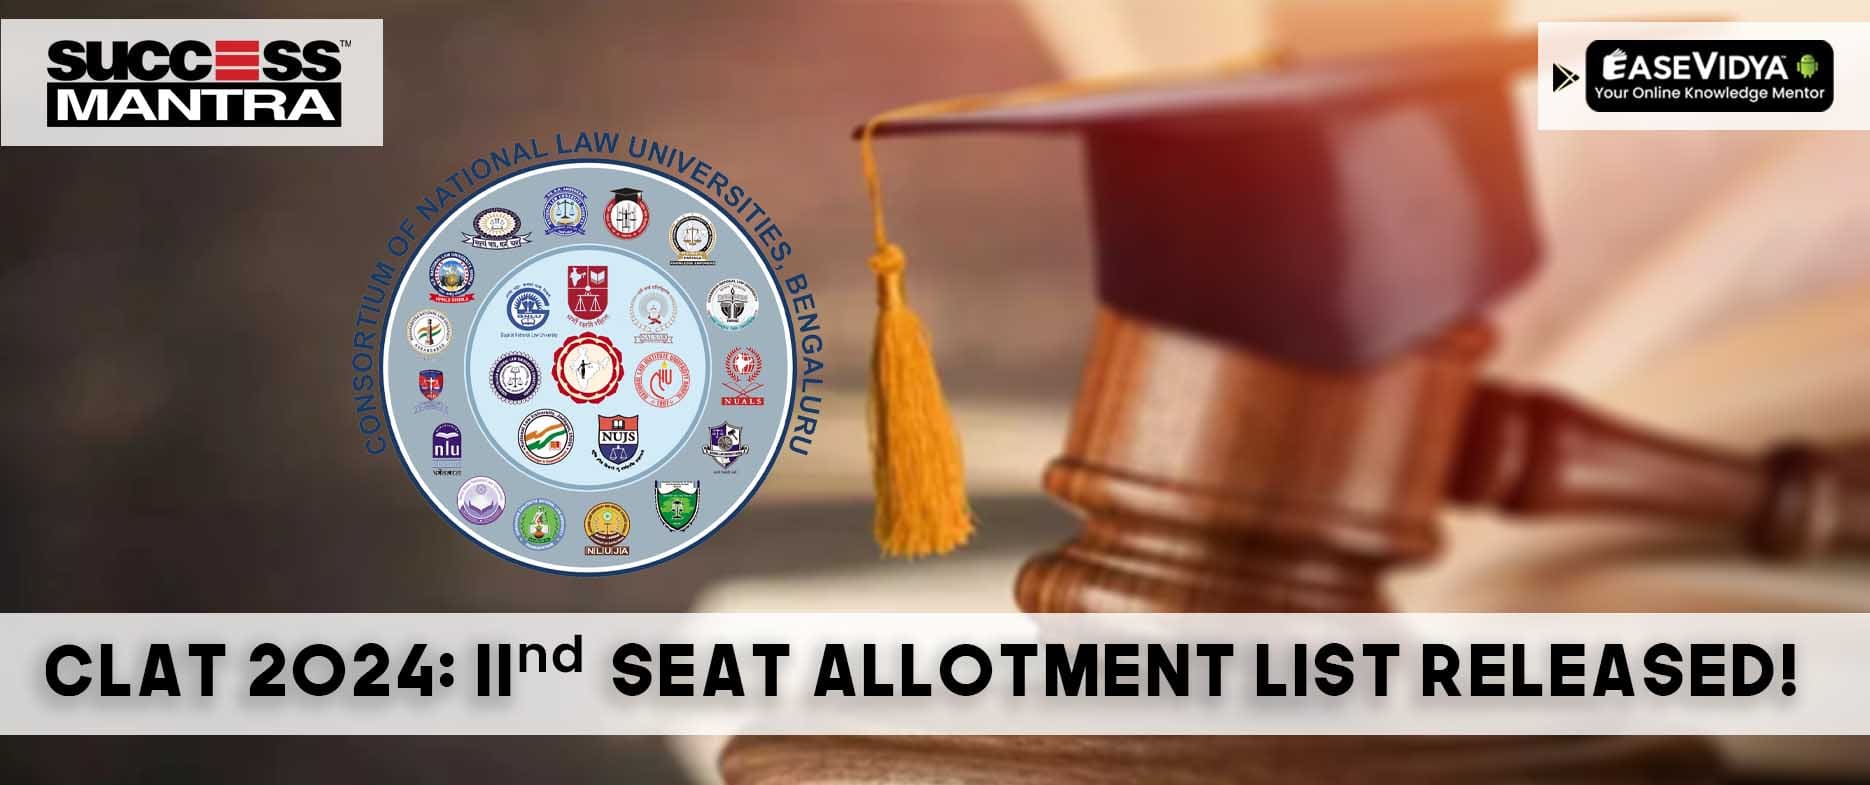 CLAT Second Allotment List has been Released! 